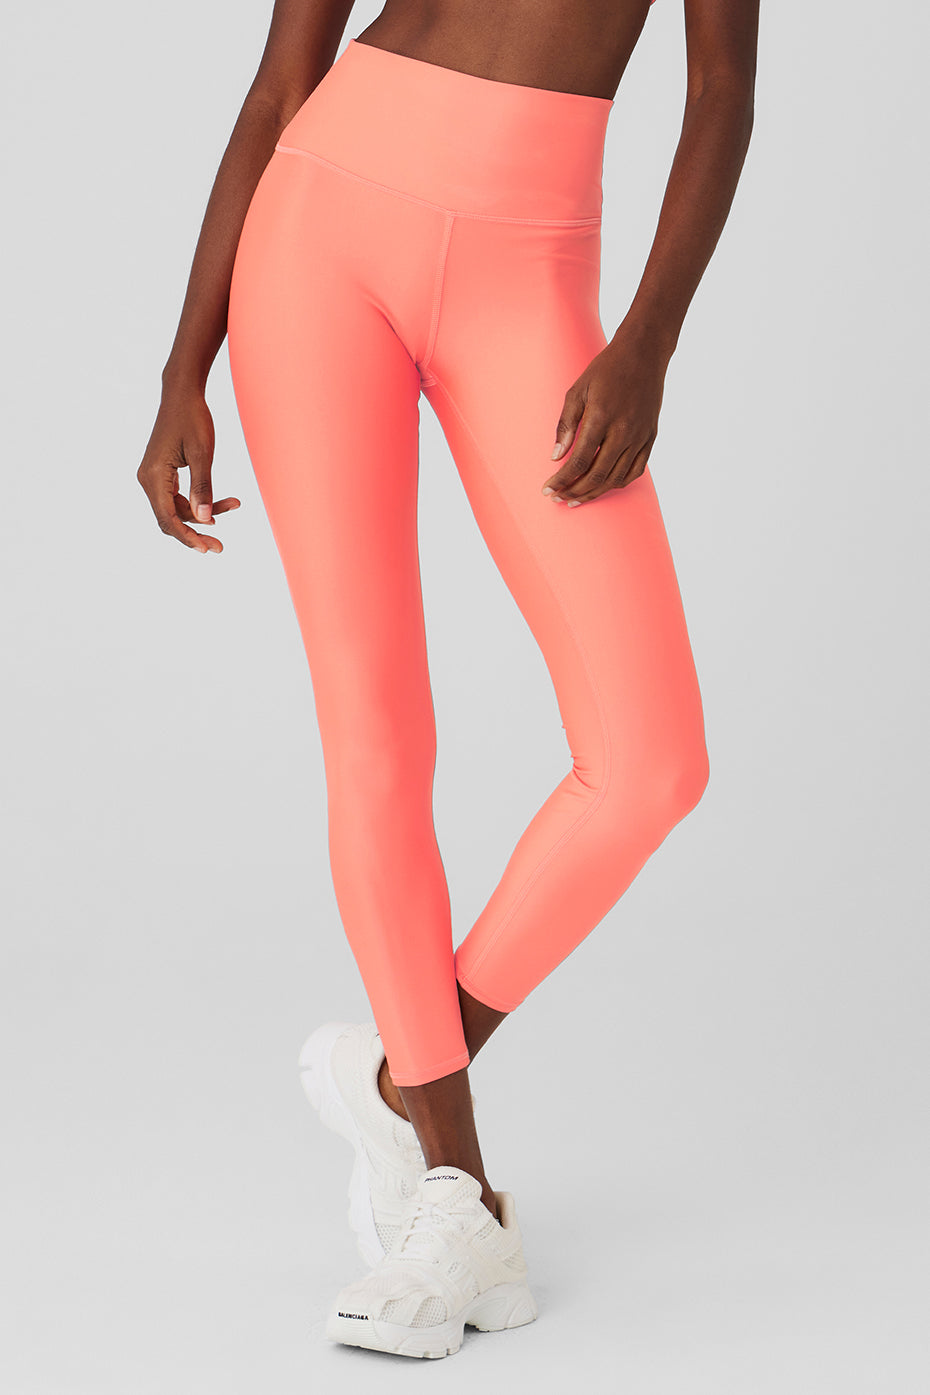 ALO YOGA Airlift High-Rise Leggings in Pink